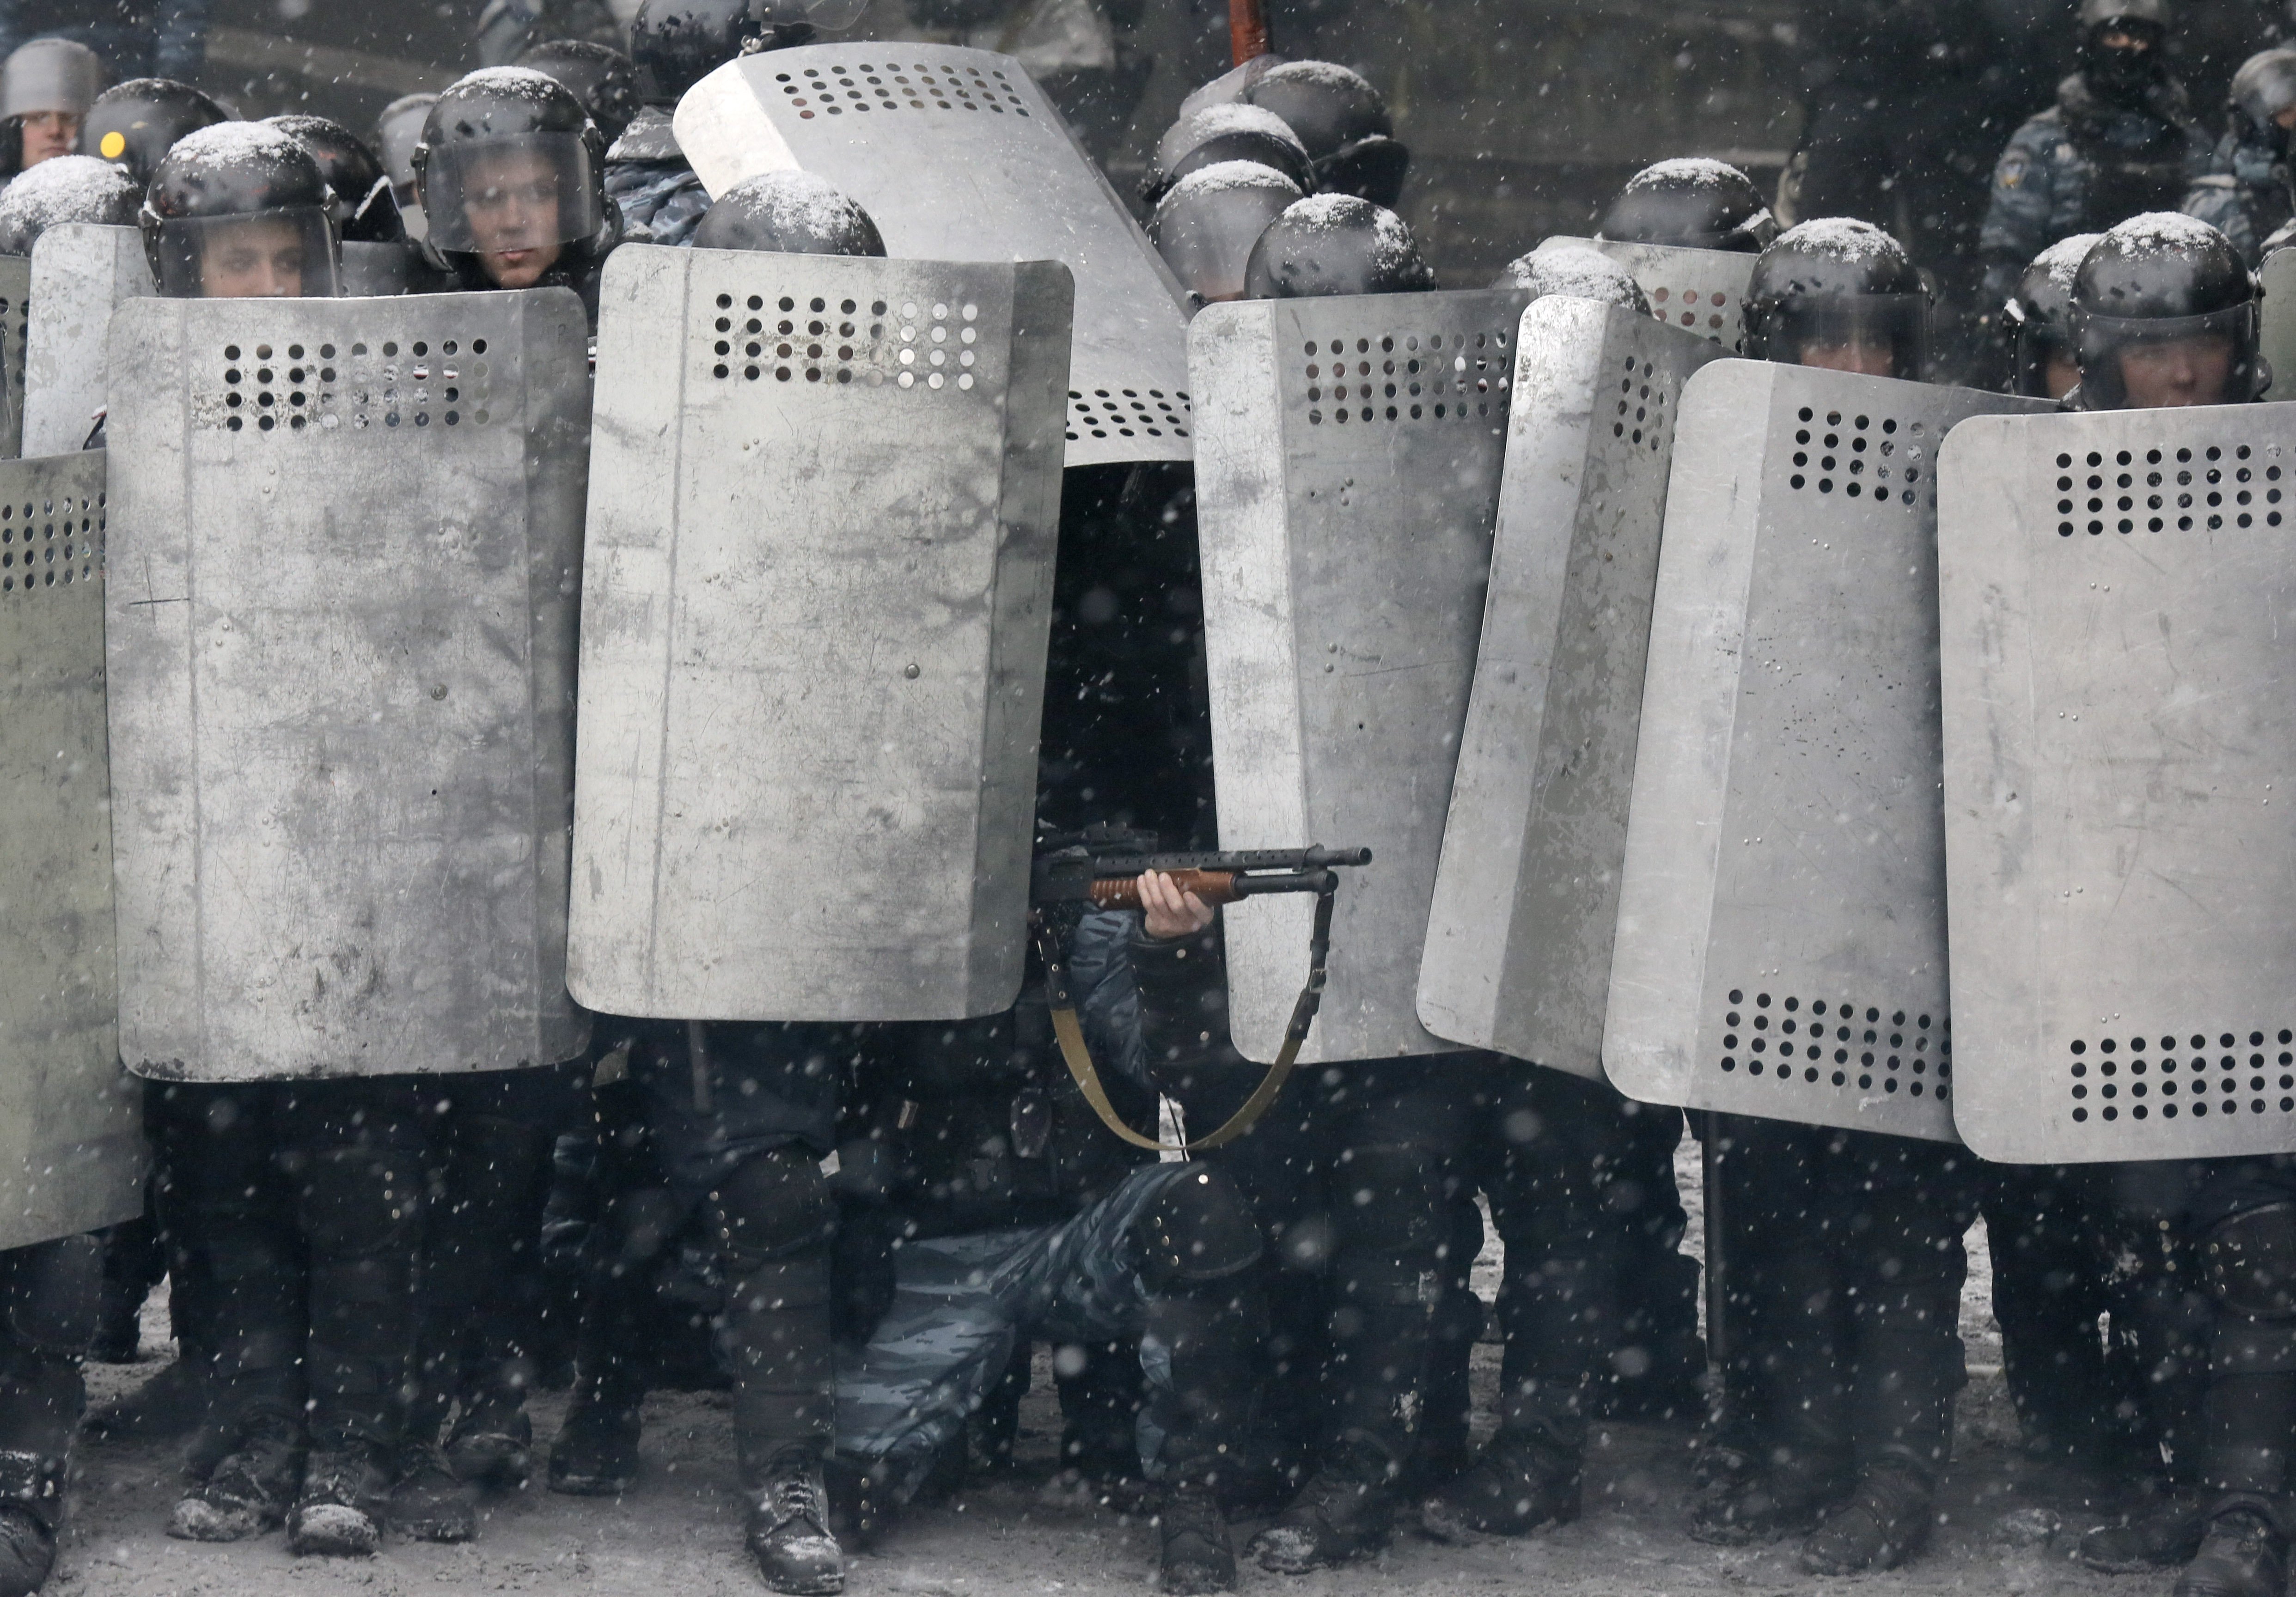 A police officer aims his shotgun during clashes with protesters in central Kiev, Jan. 22, 2014.